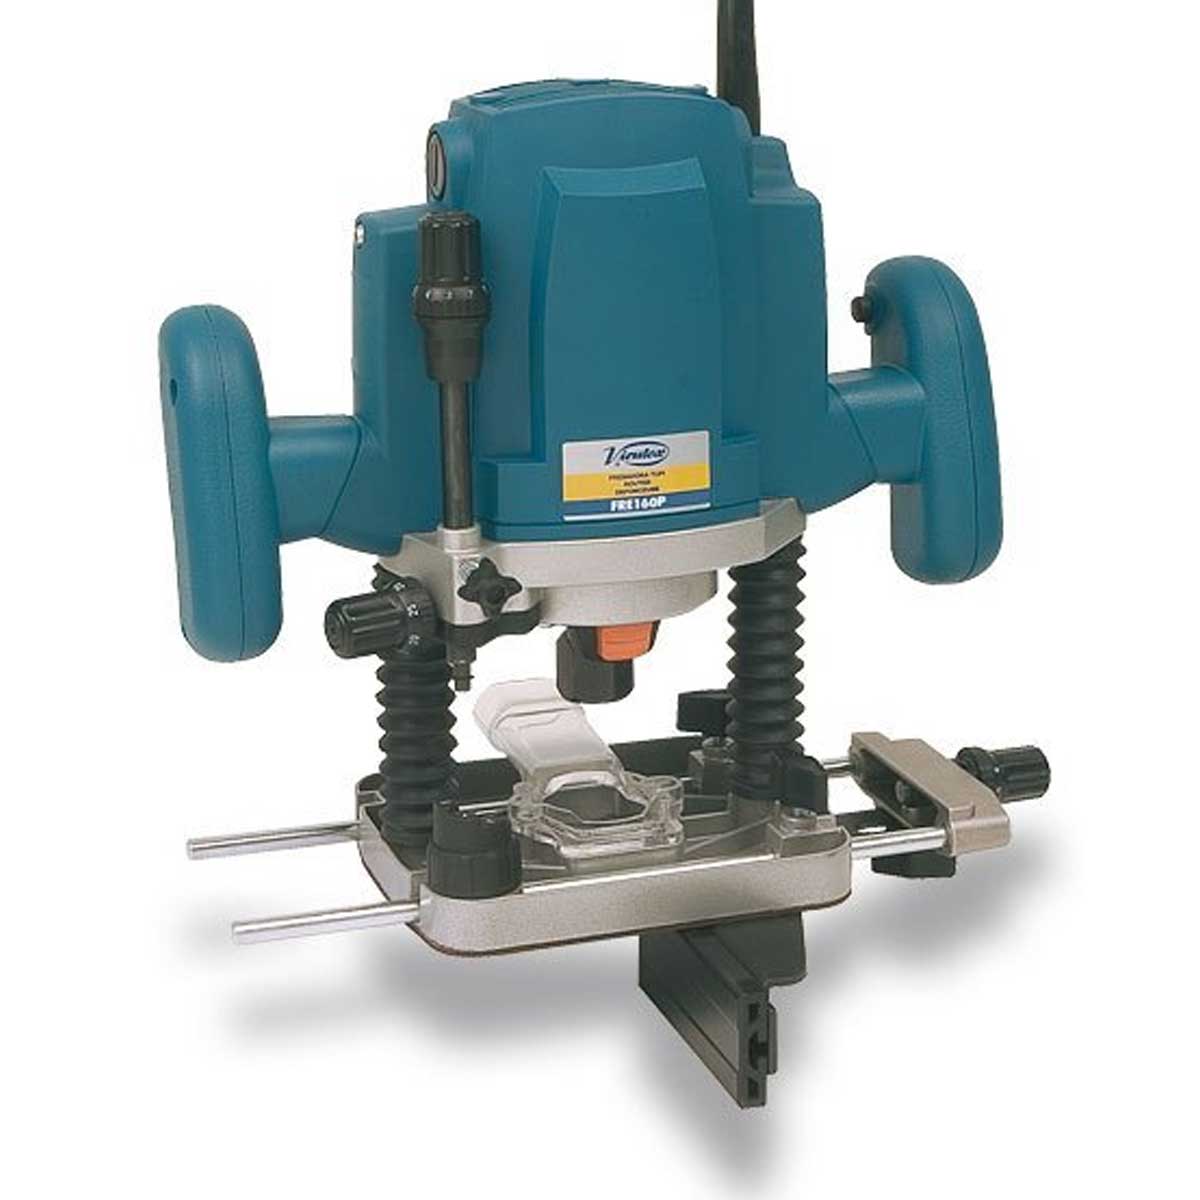 European Hand Router Manufacturers, Suppliers in Agra